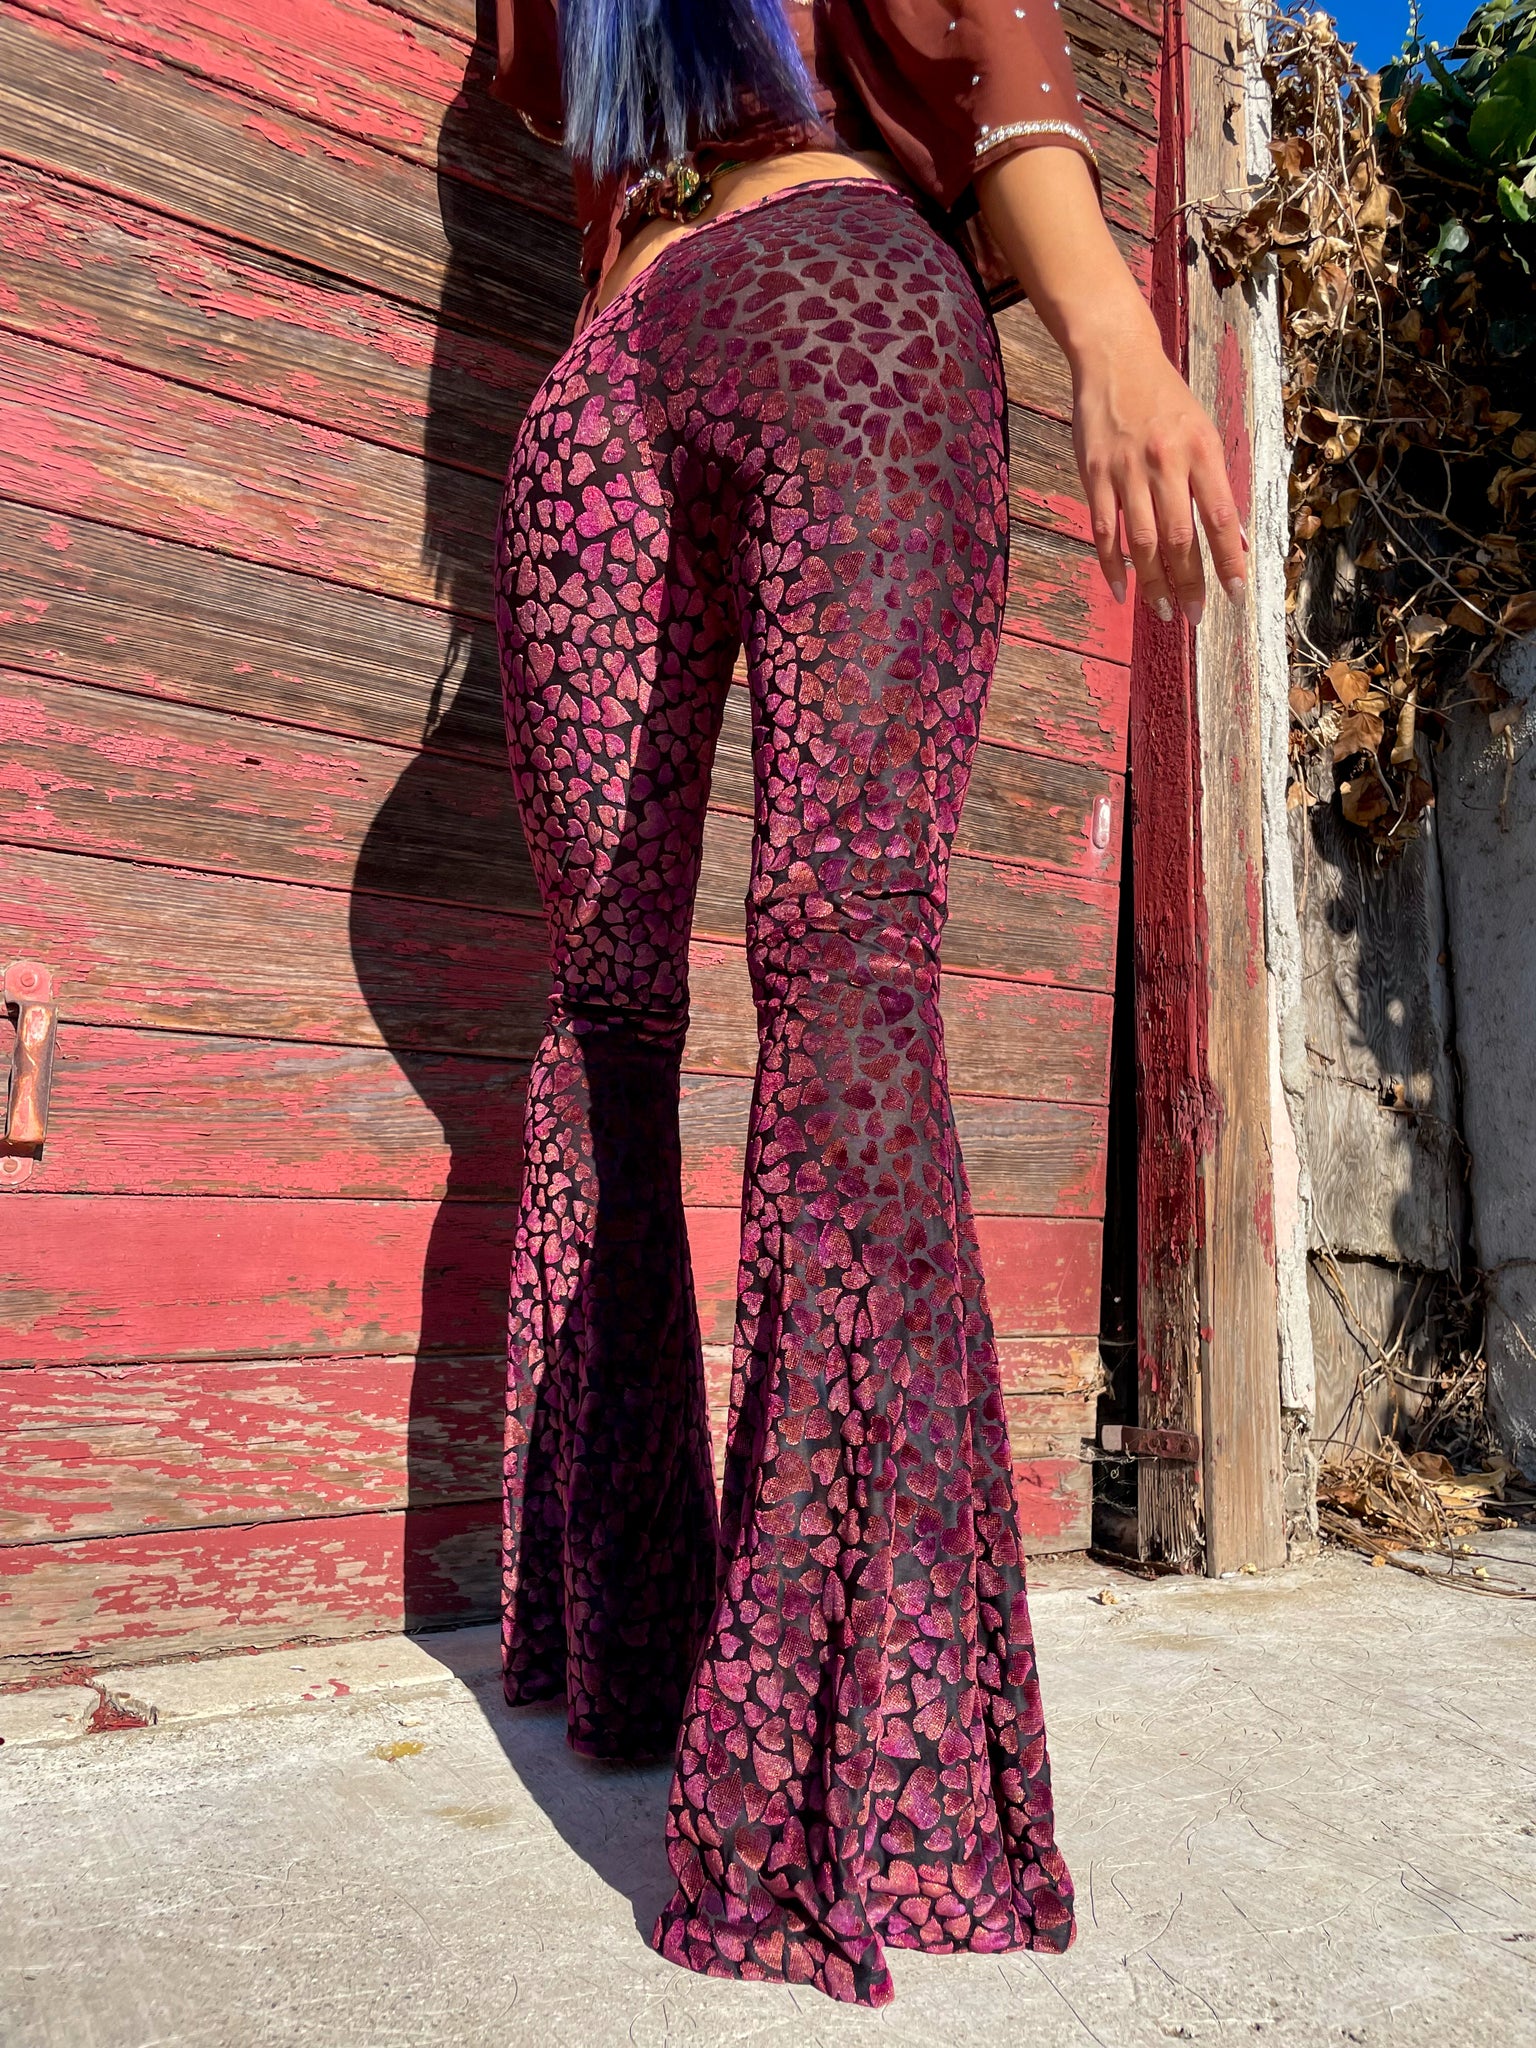 Flares + Bell Bottoms